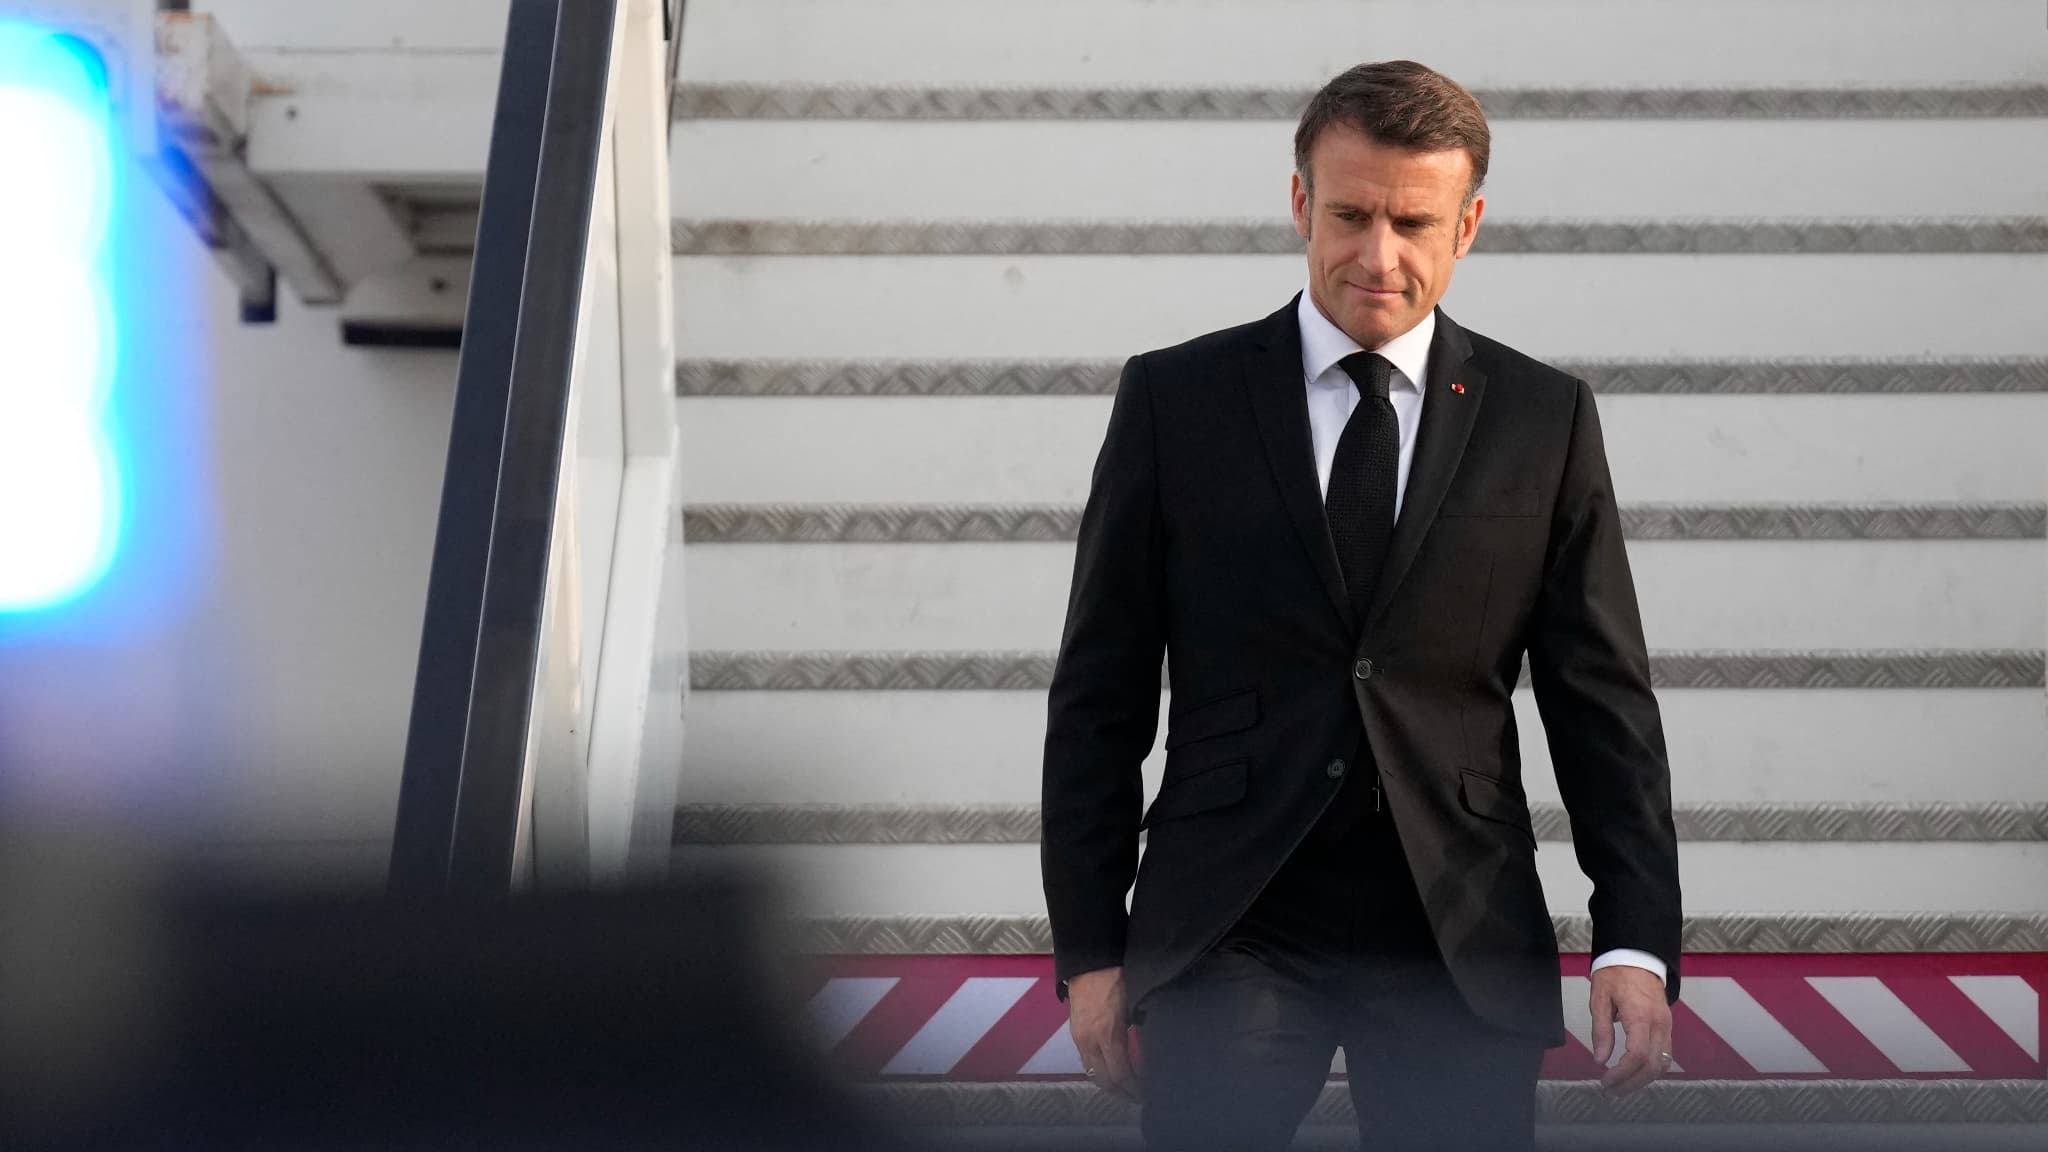 Live – Israel-Hamas: Macron continues Middle East tour, threatens UN aid to Gaza